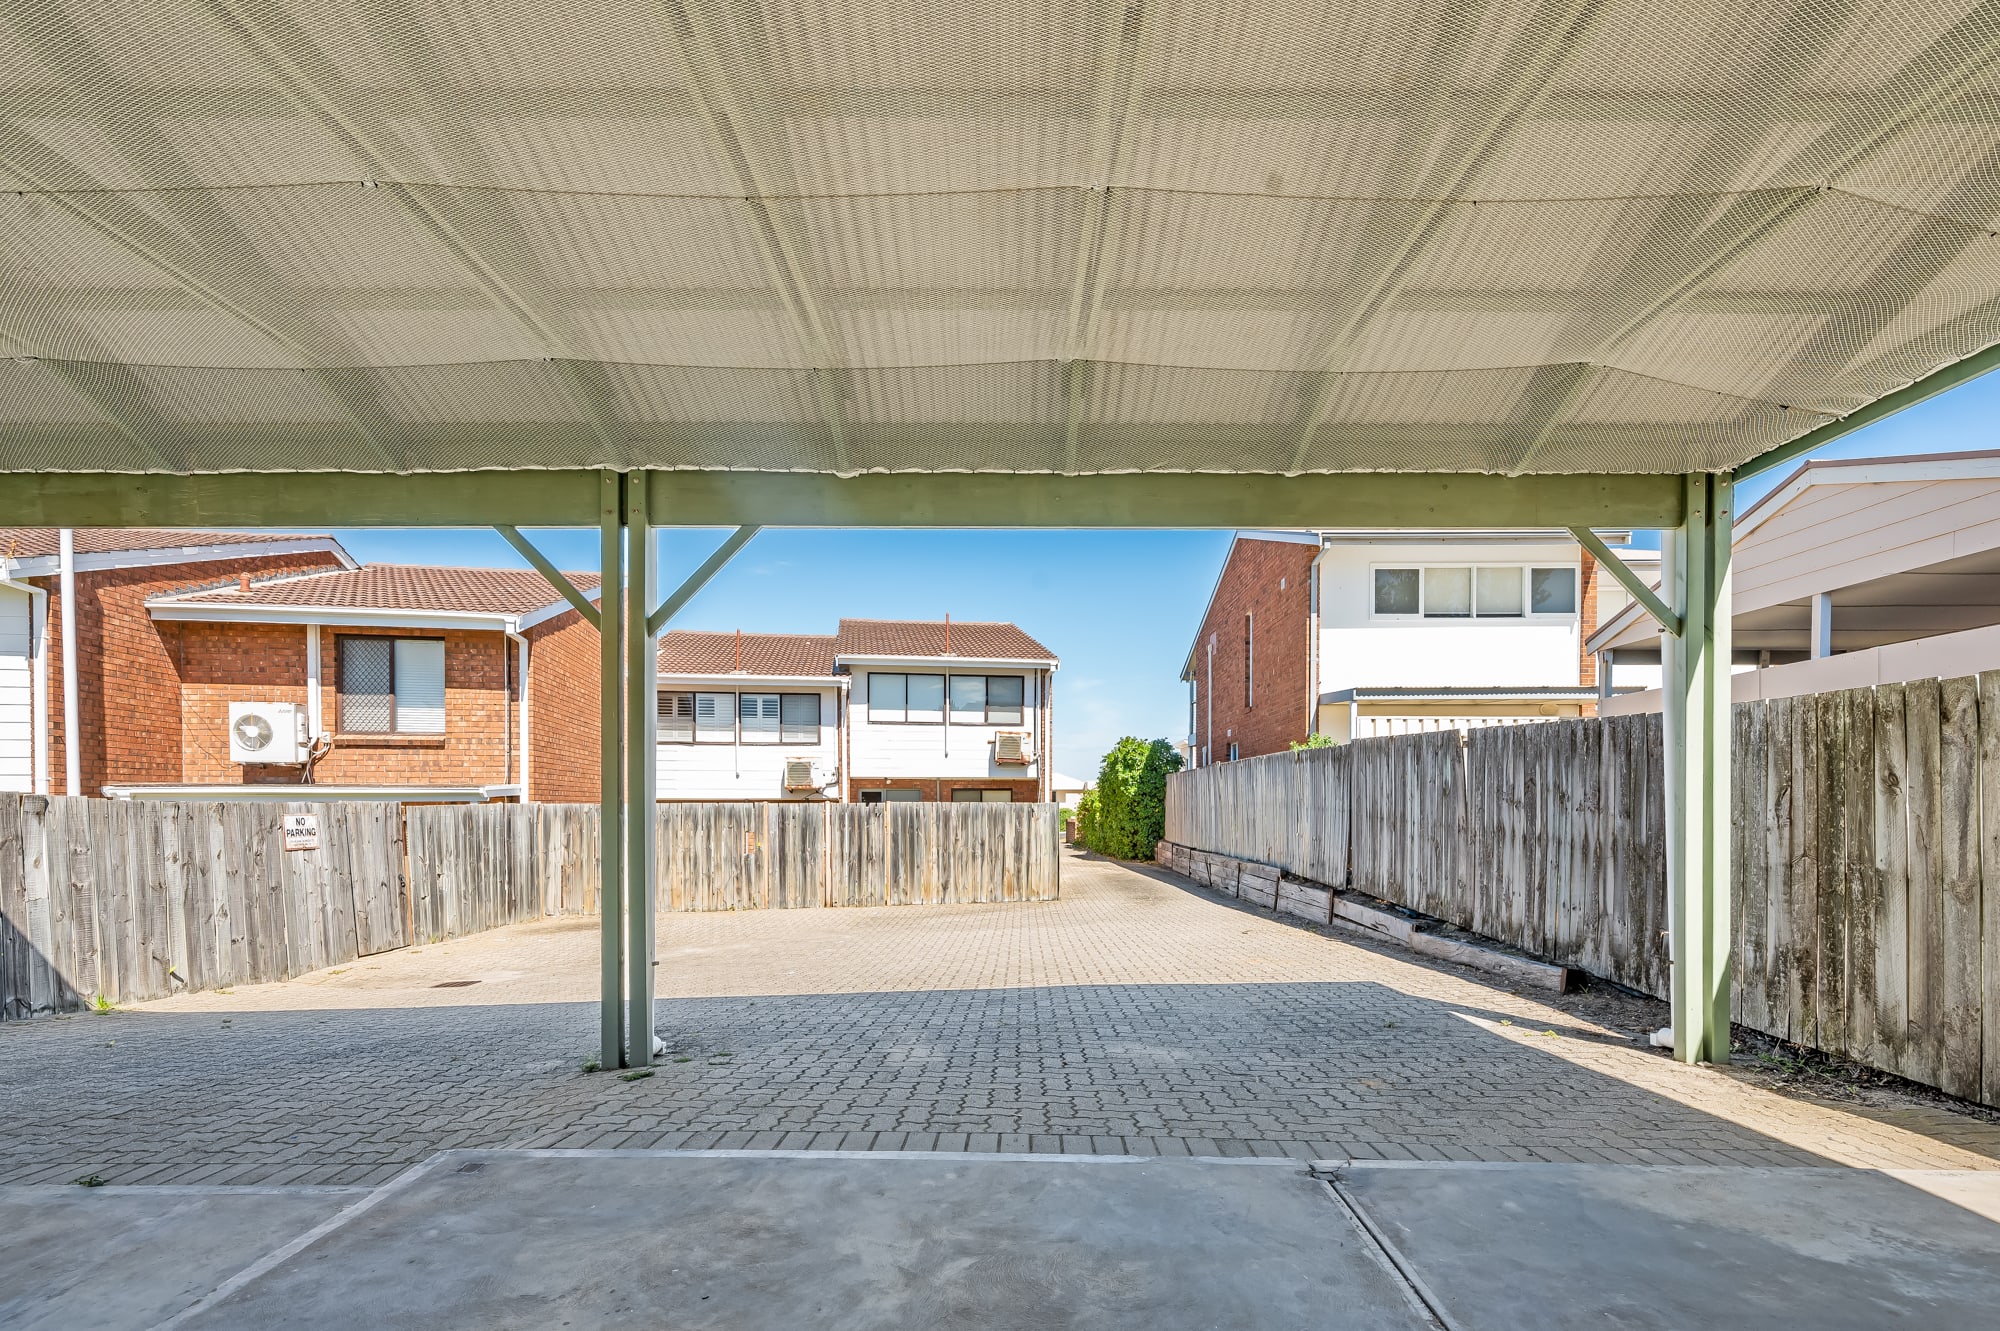 The carport at the rear of the property for parking